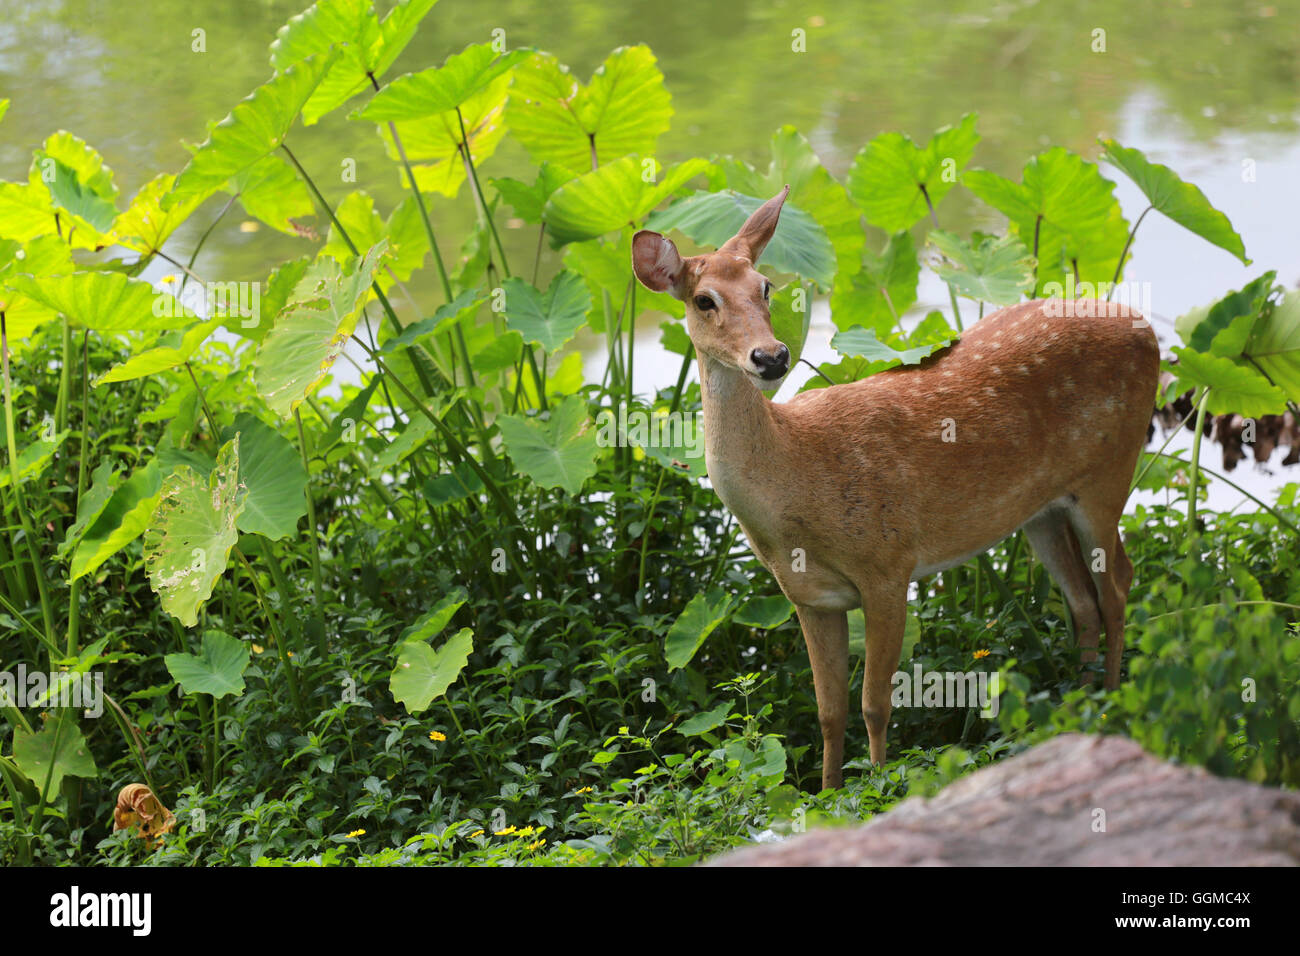 Deer or young hart animal in the forest Near the pond. Stock Photo